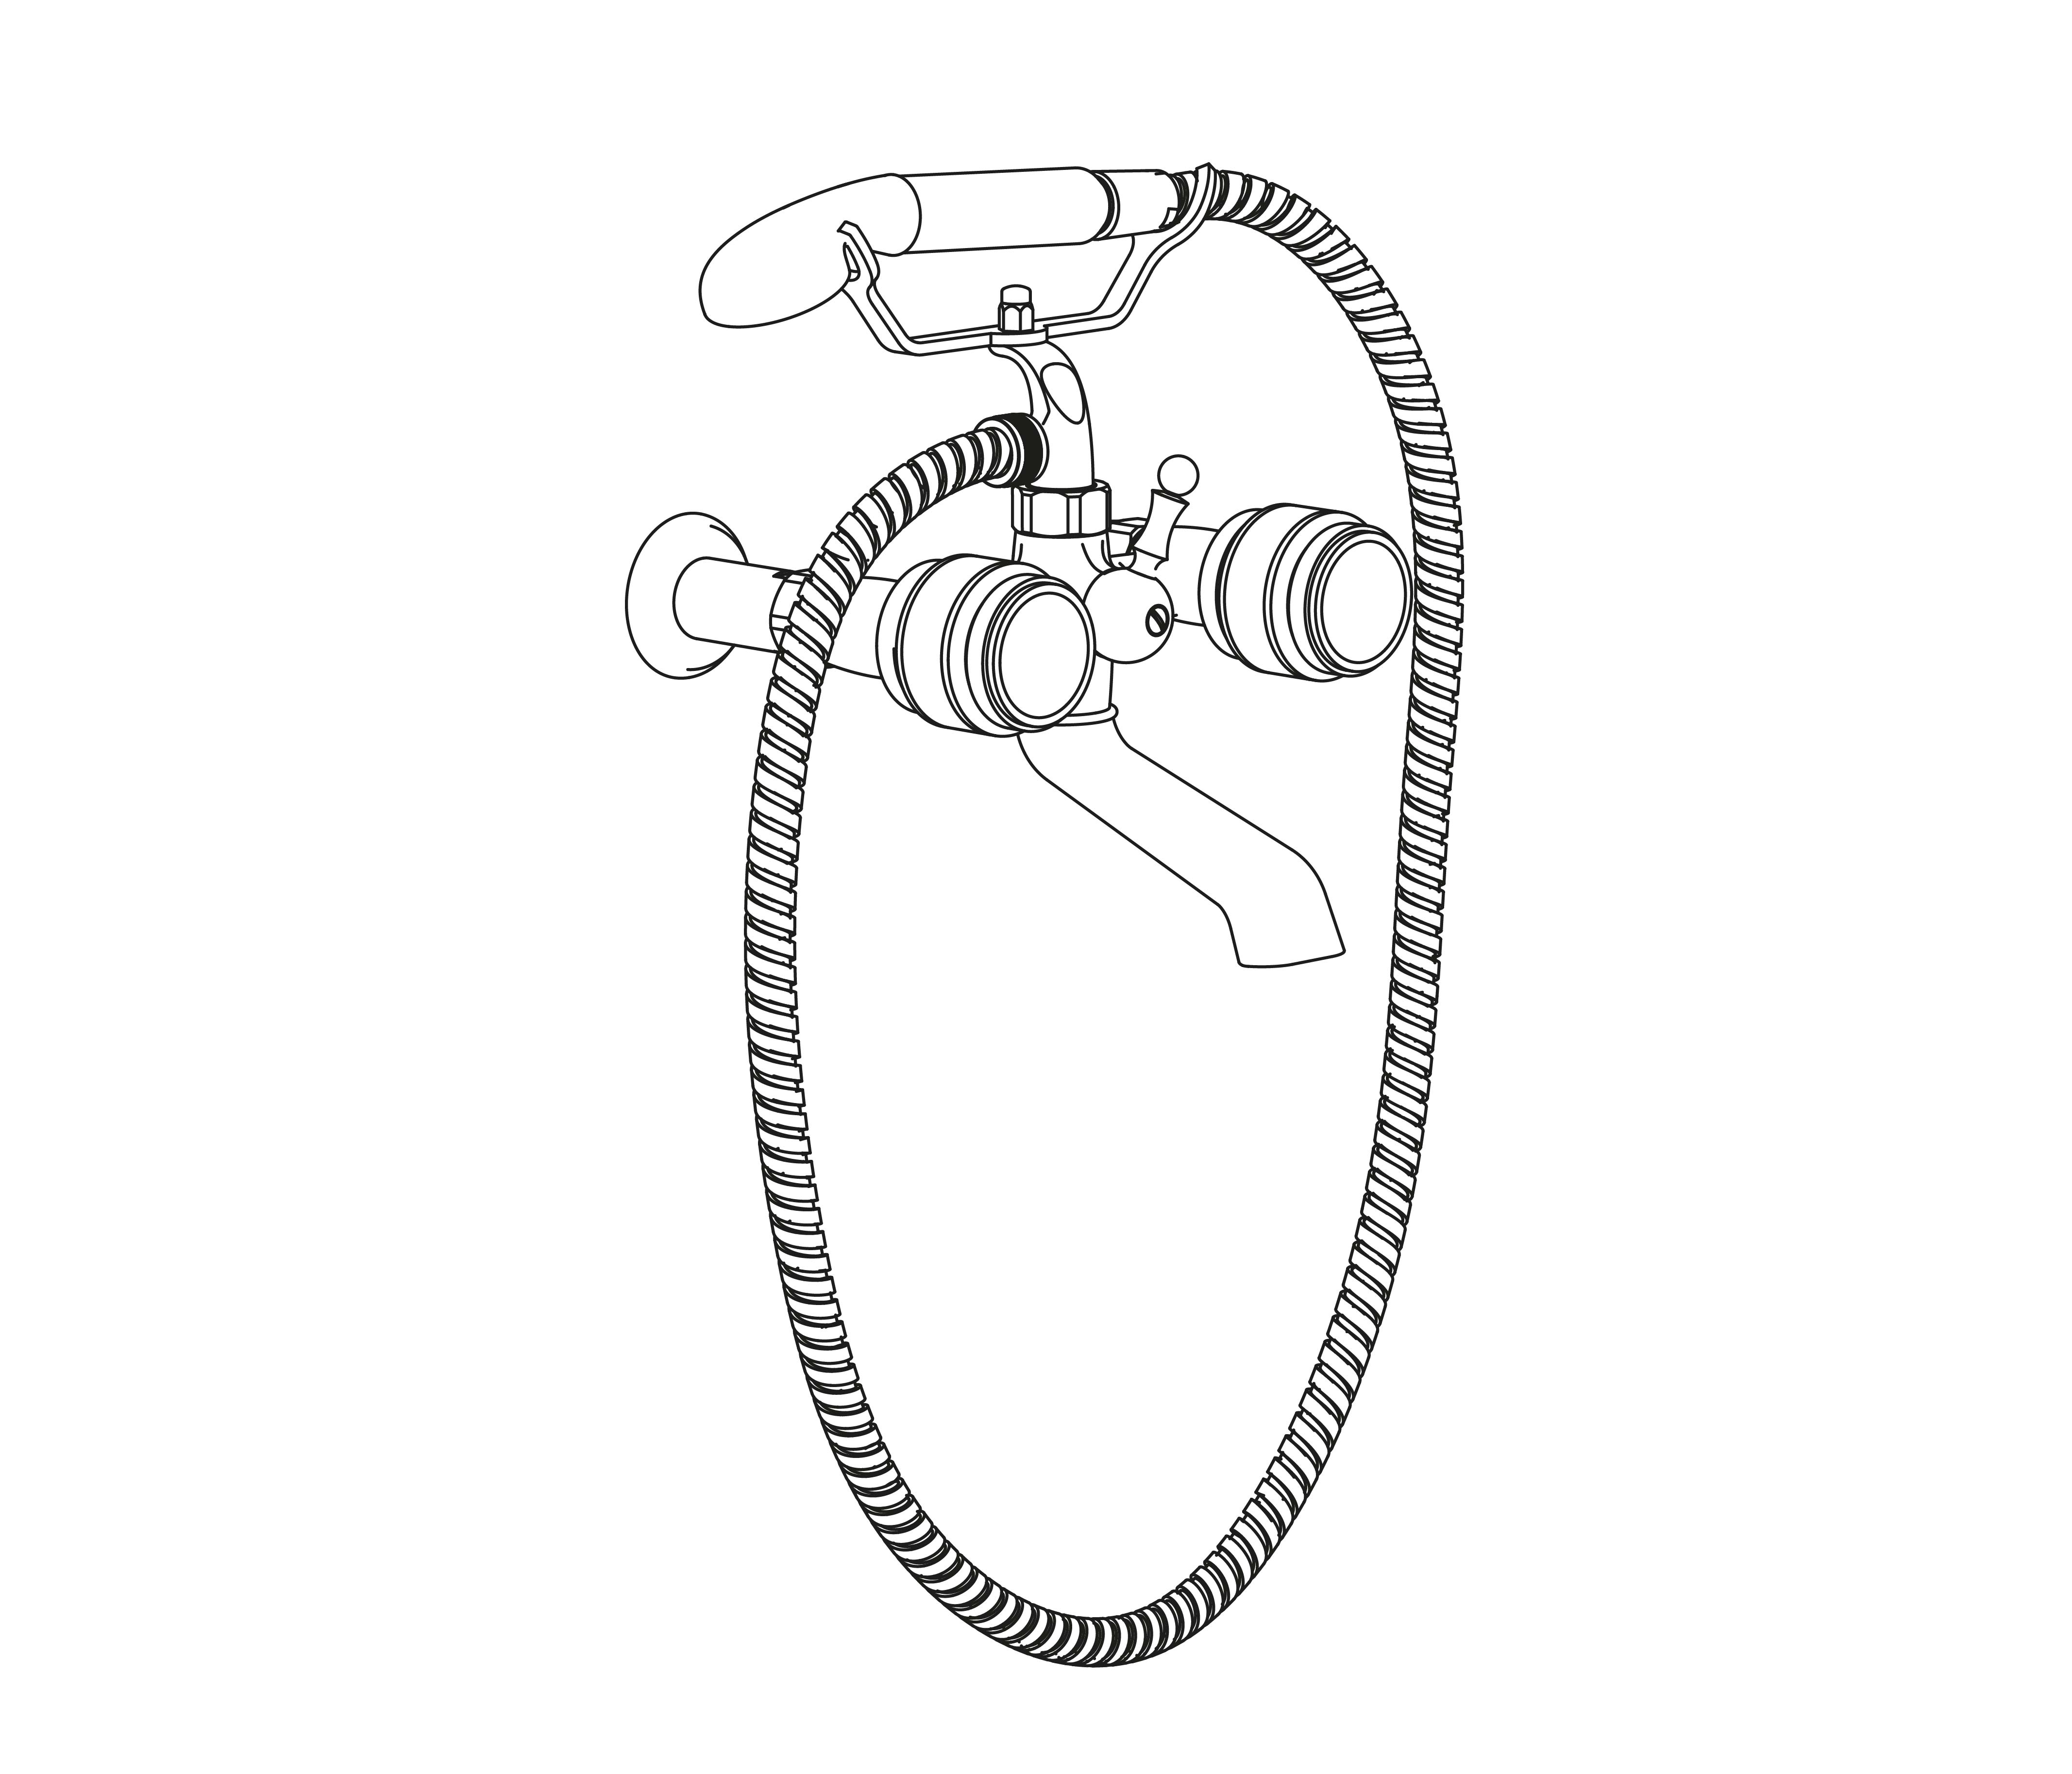 S89-3201 Wall mounted bath and shower mixer